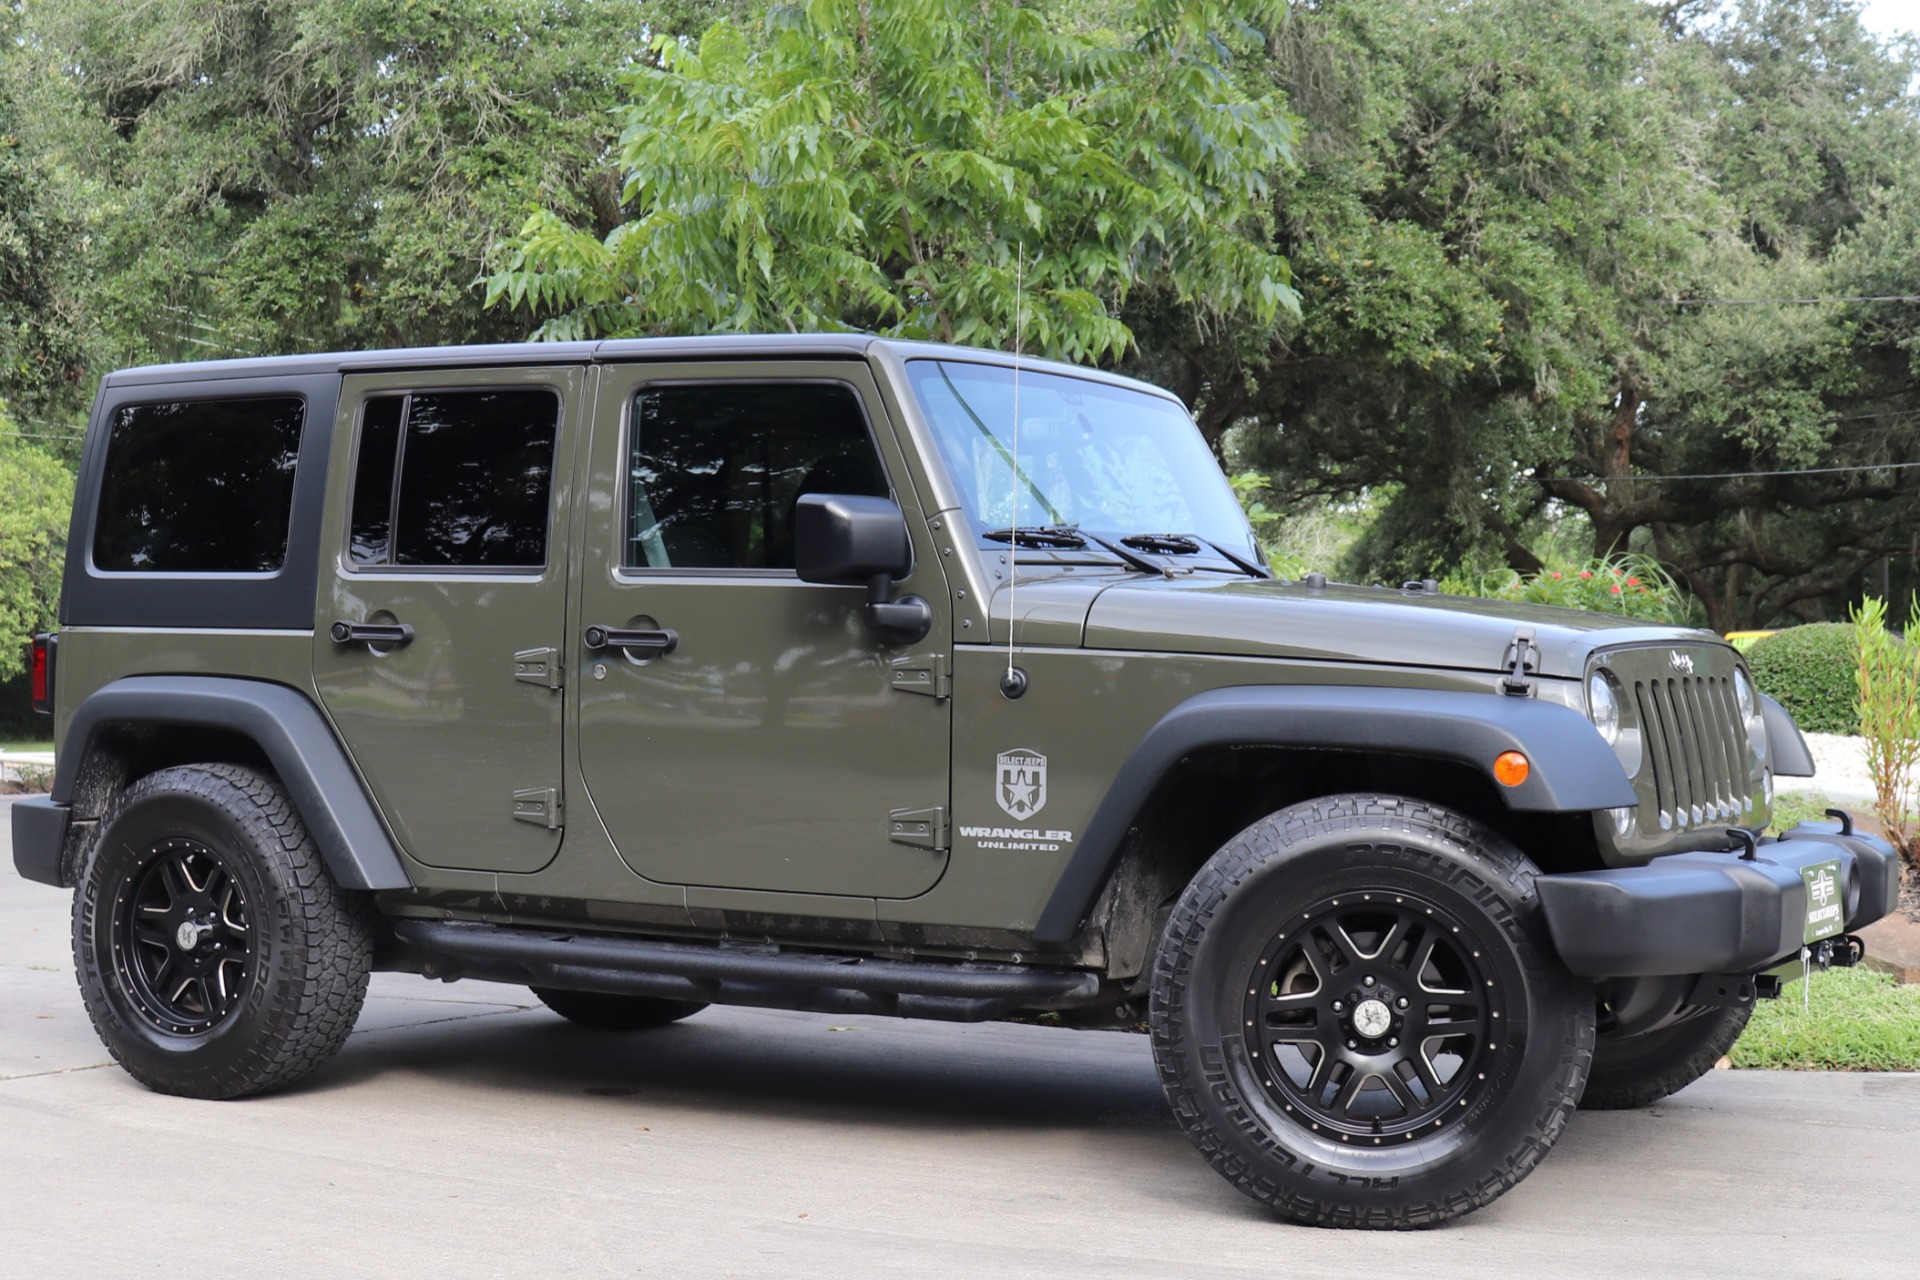 Used 2015 Jeep Wrangler Unlimited Sport For Sale ($28,995) | Select Jeeps  Inc. Stock #725904